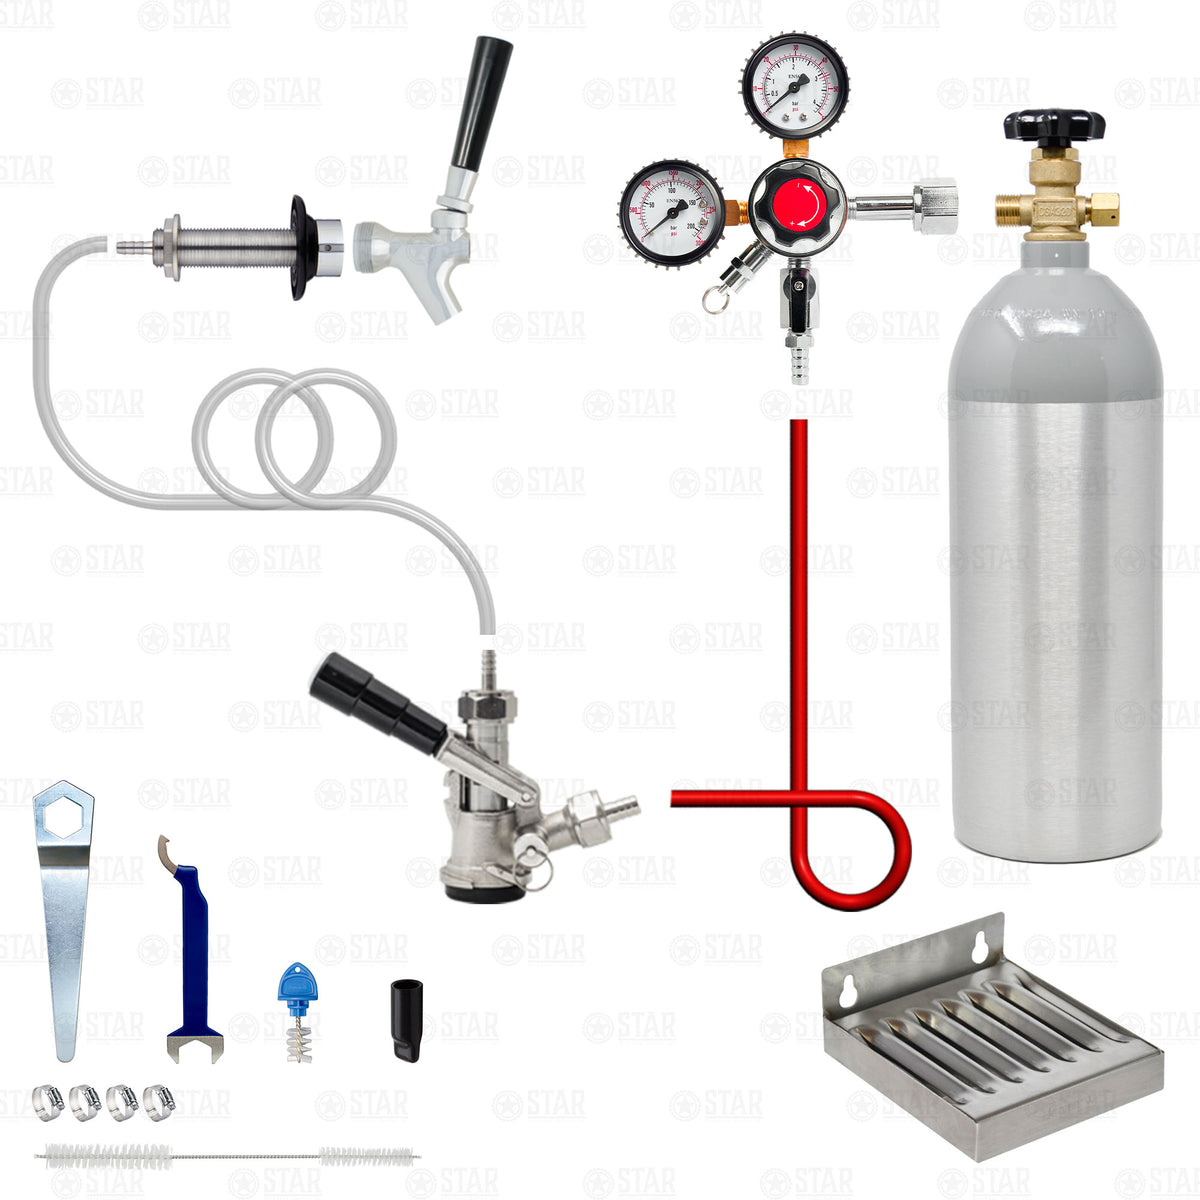 Standard Homebrew Kegerator Refrigerator Conversion Kit (CO2 Tank and Keg are NOT Included) - 2